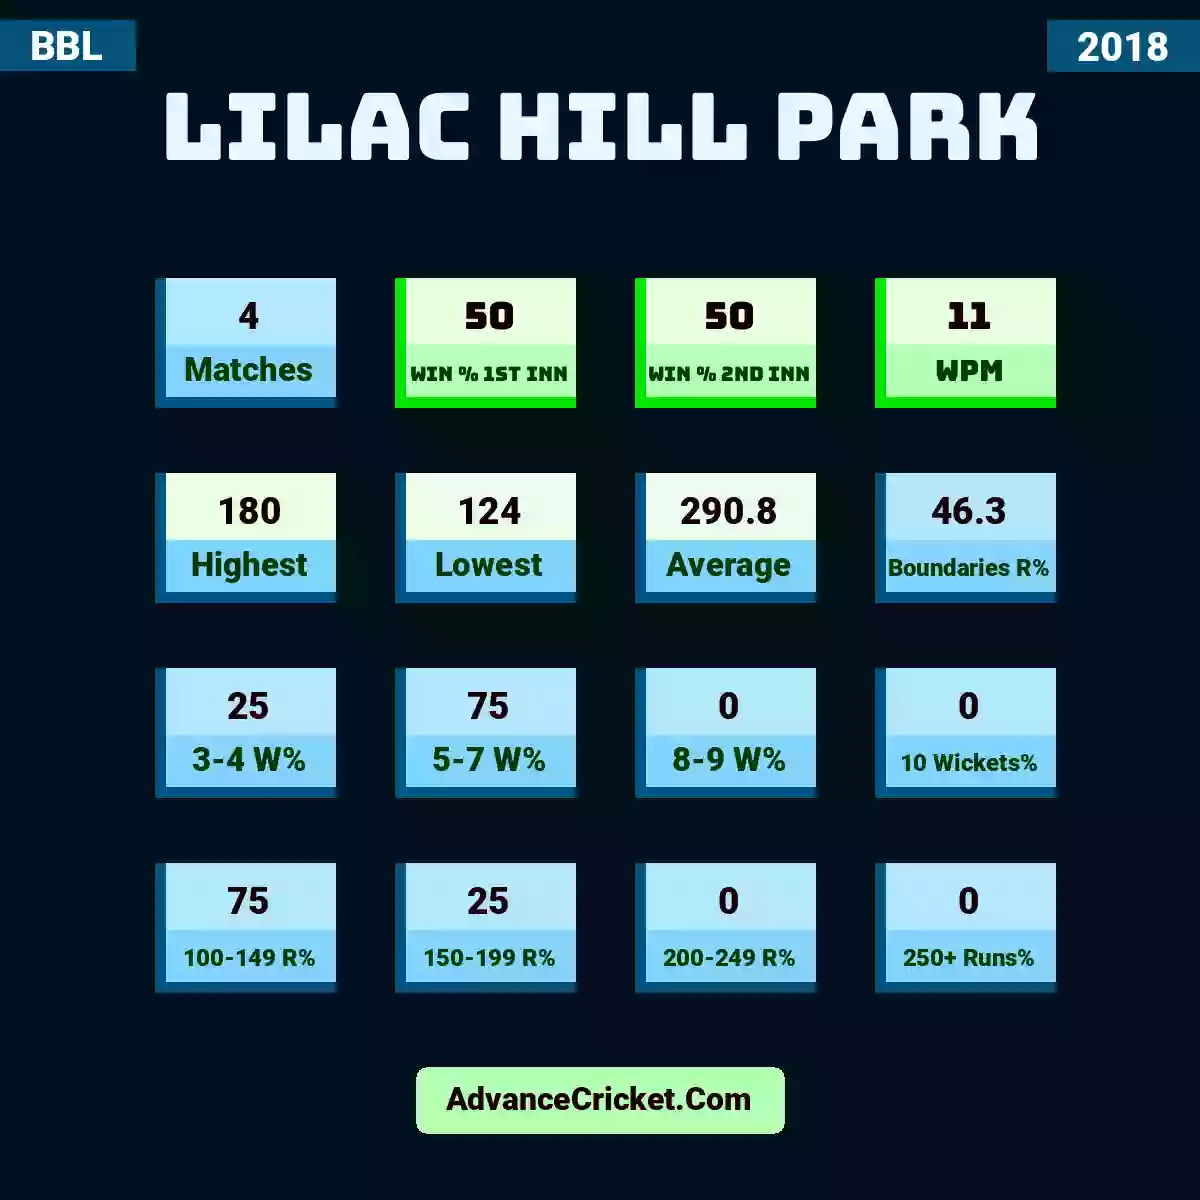 Image showing Lilac Hill Park with Matches: 4, Win % 1st Inn: 50, Win % 2nd Inn: 50, WPM: 11, Highest: 180, Lowest: 124, Average: 290.8, Boundaries R%: 46.3, 3-4 W%: 25, 5-7 W%: 75, 8-9 W%: 0, 10 Wickets%: 0, 100-149 R%: 75, 150-199 R%: 25, 200-249 R%: 0, 250+ Runs%: 0.